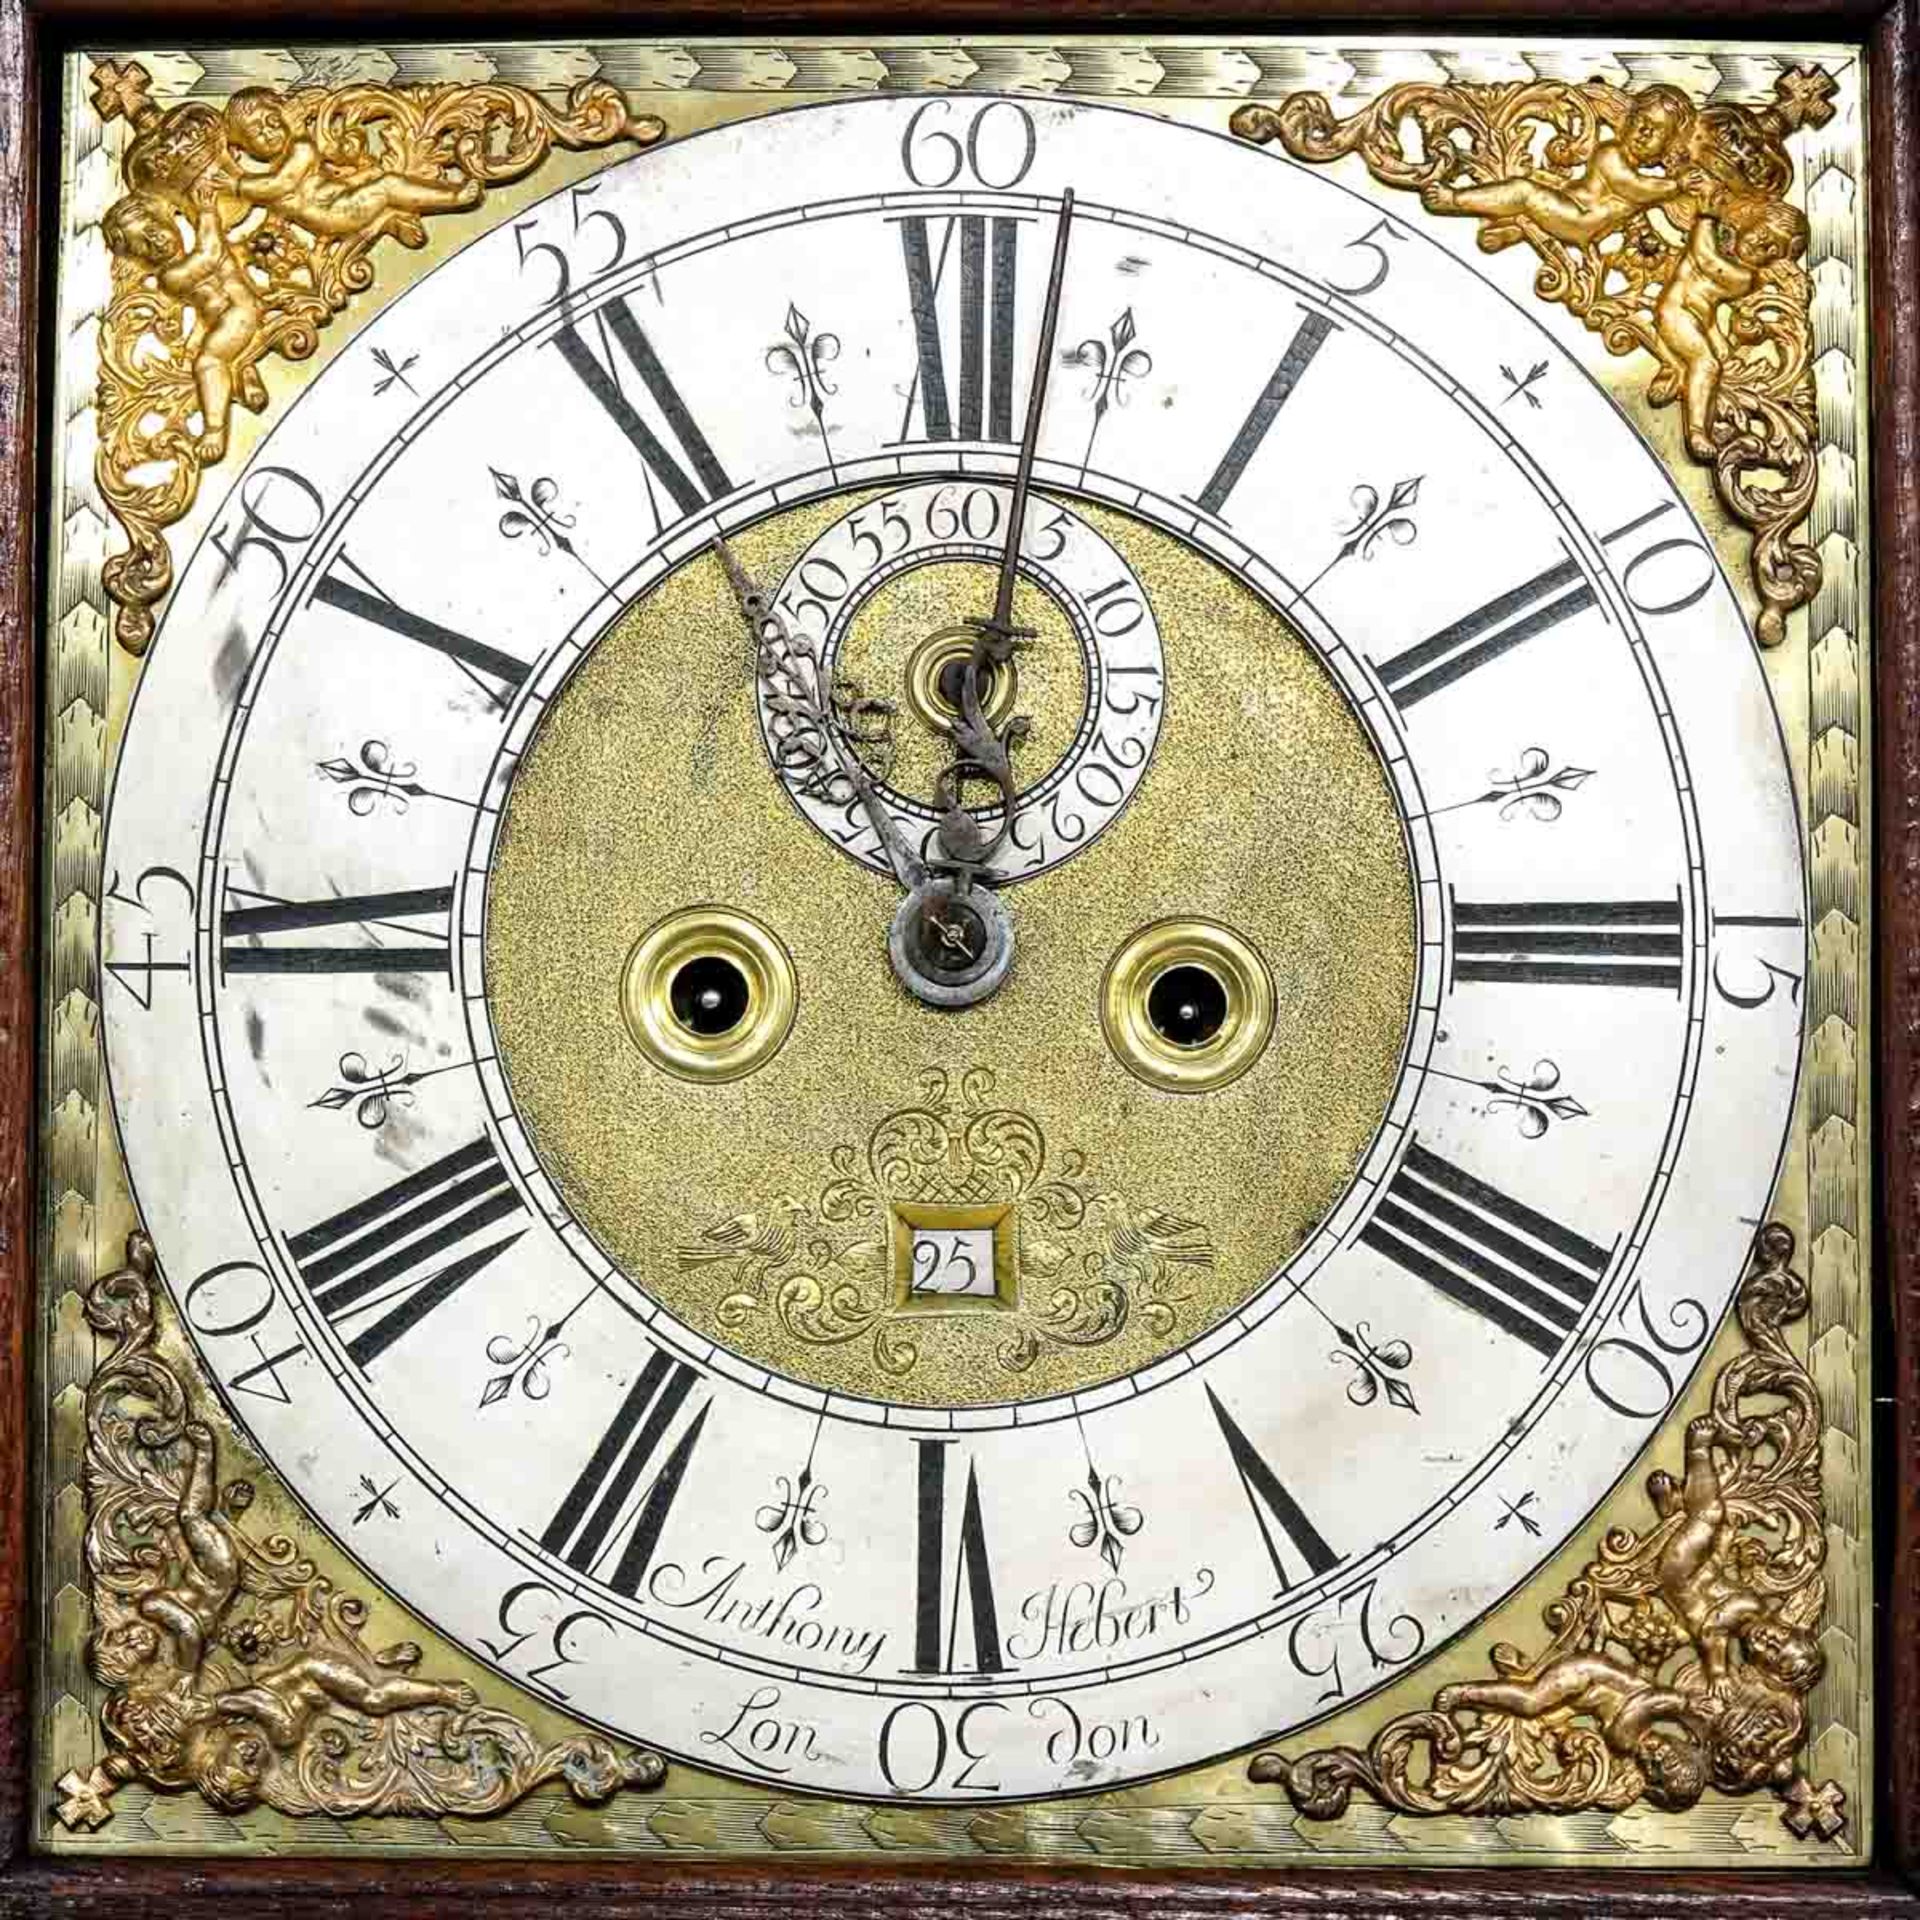 A Standing Clock Signed Anthony Herbert London Circa 1710 - Image 4 of 10